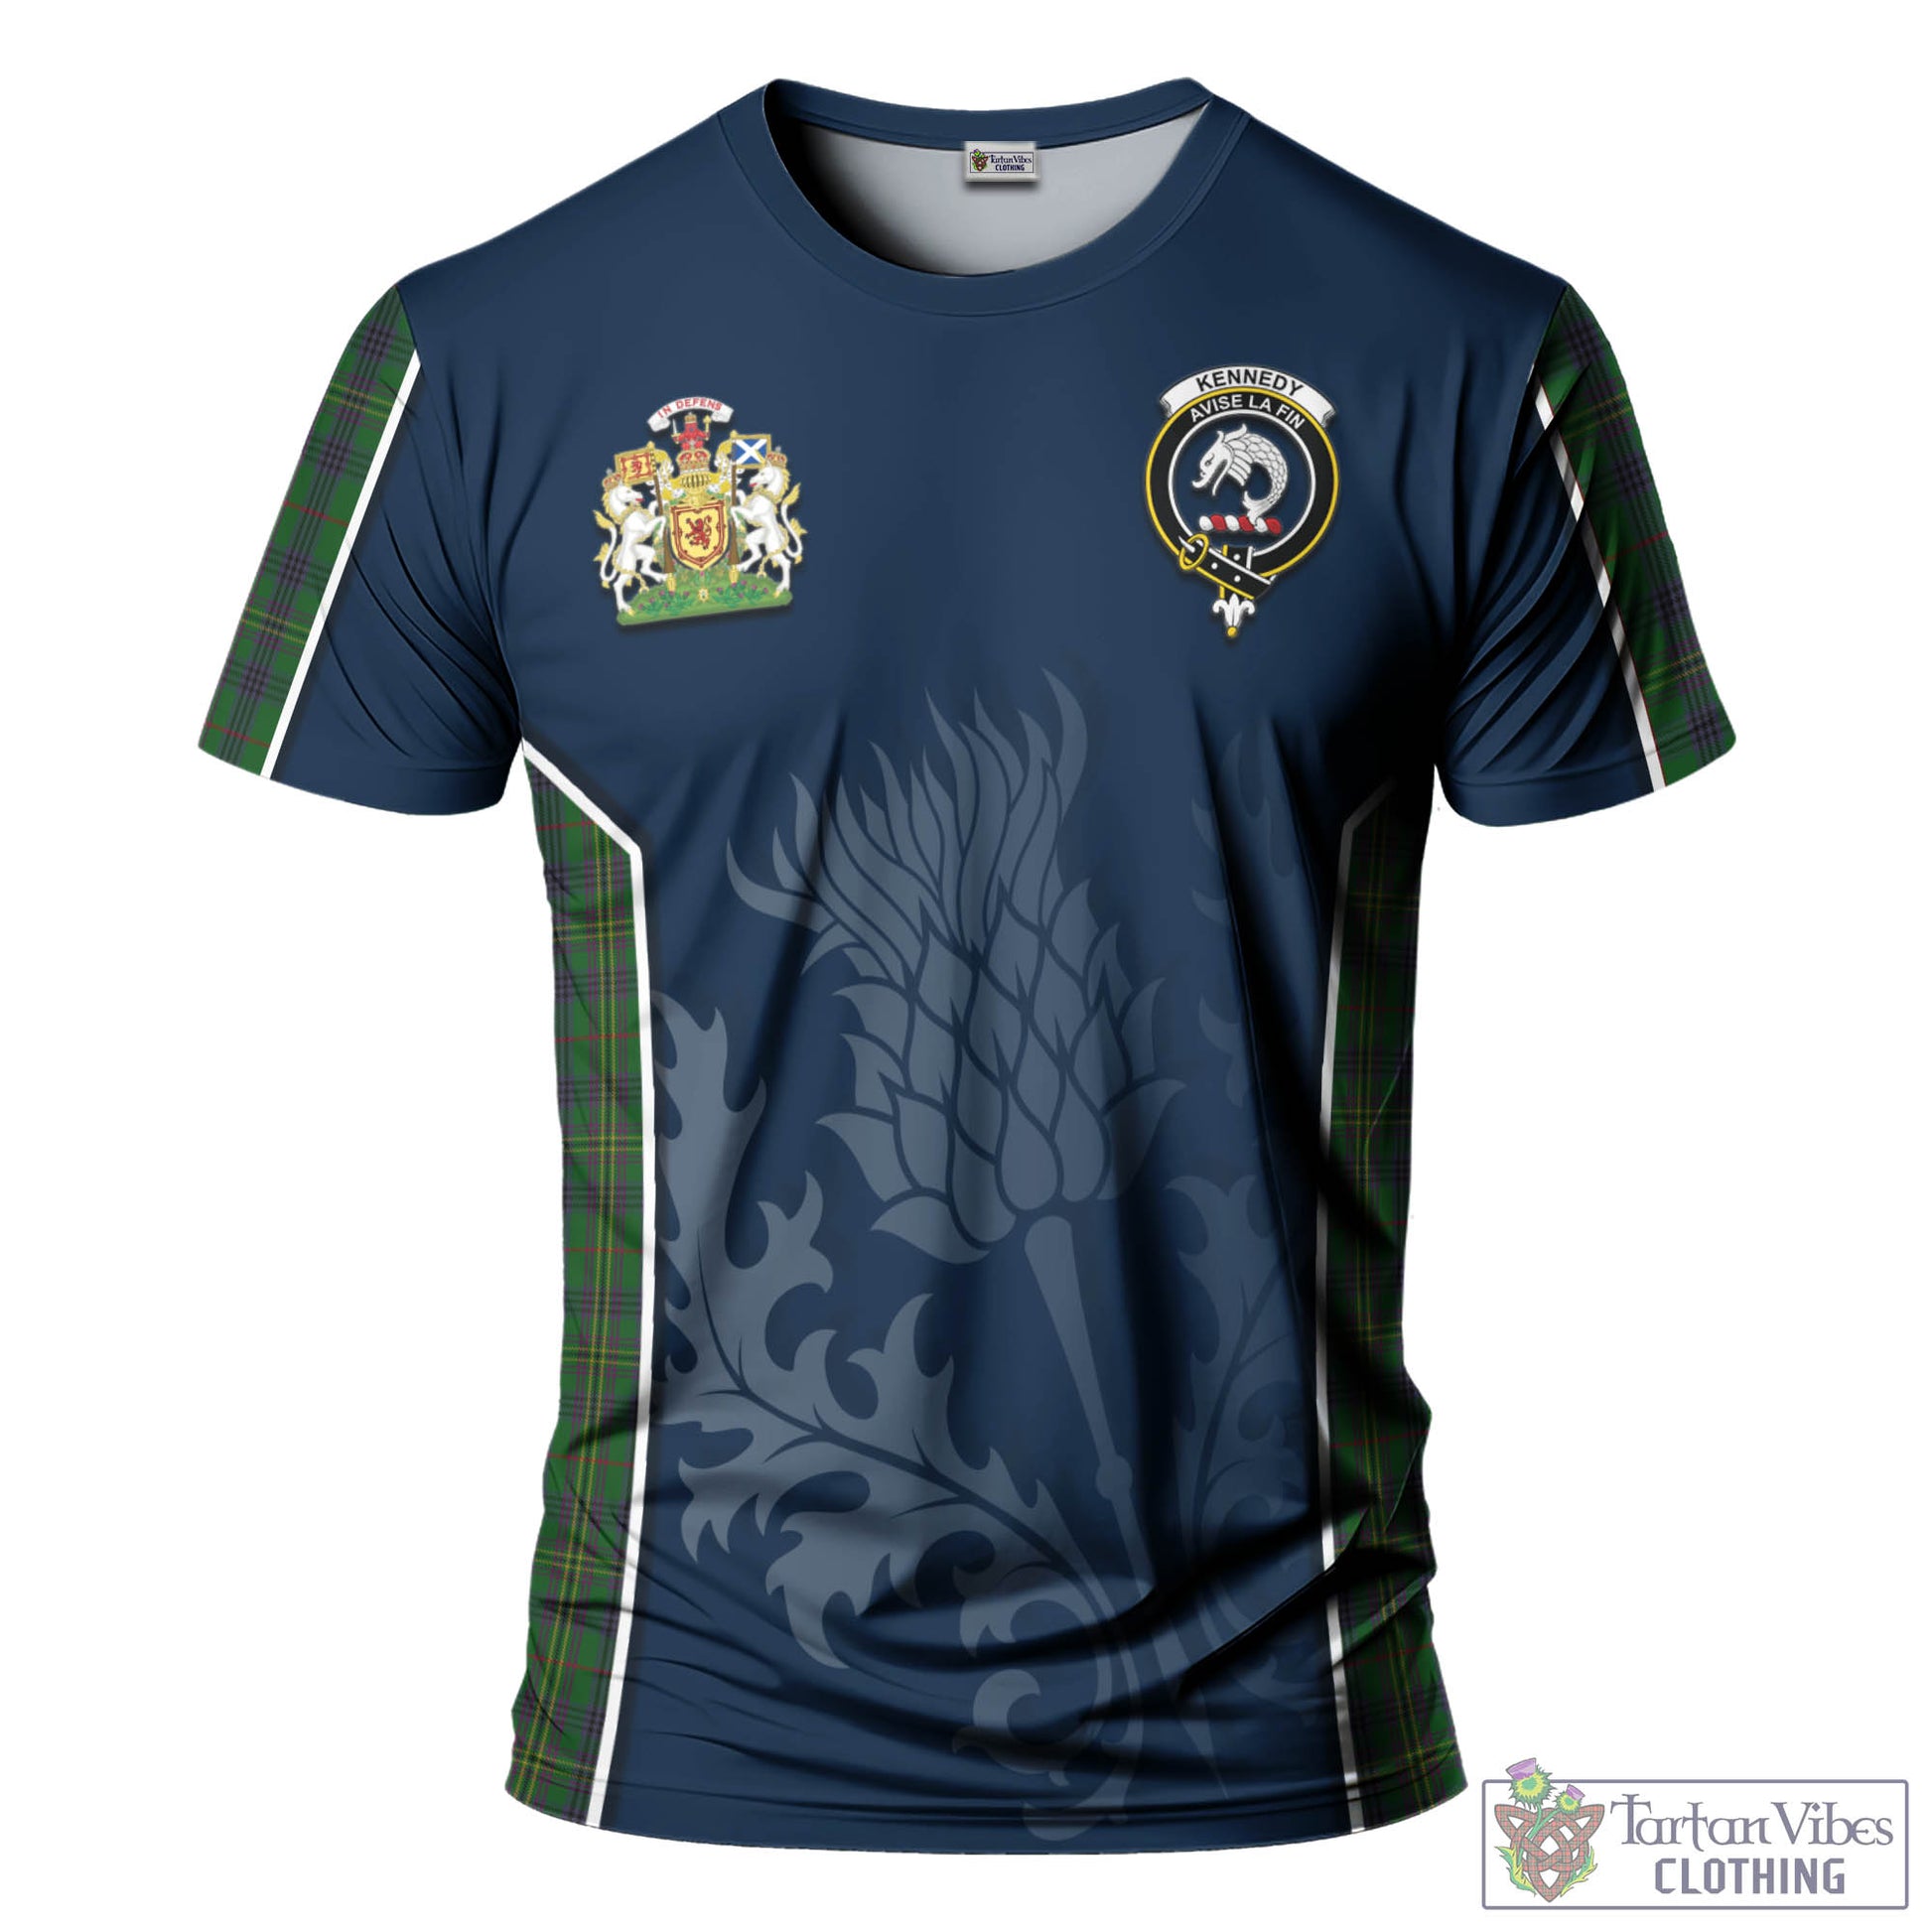 Tartan Vibes Clothing Kennedy Tartan T-Shirt with Family Crest and Scottish Thistle Vibes Sport Style